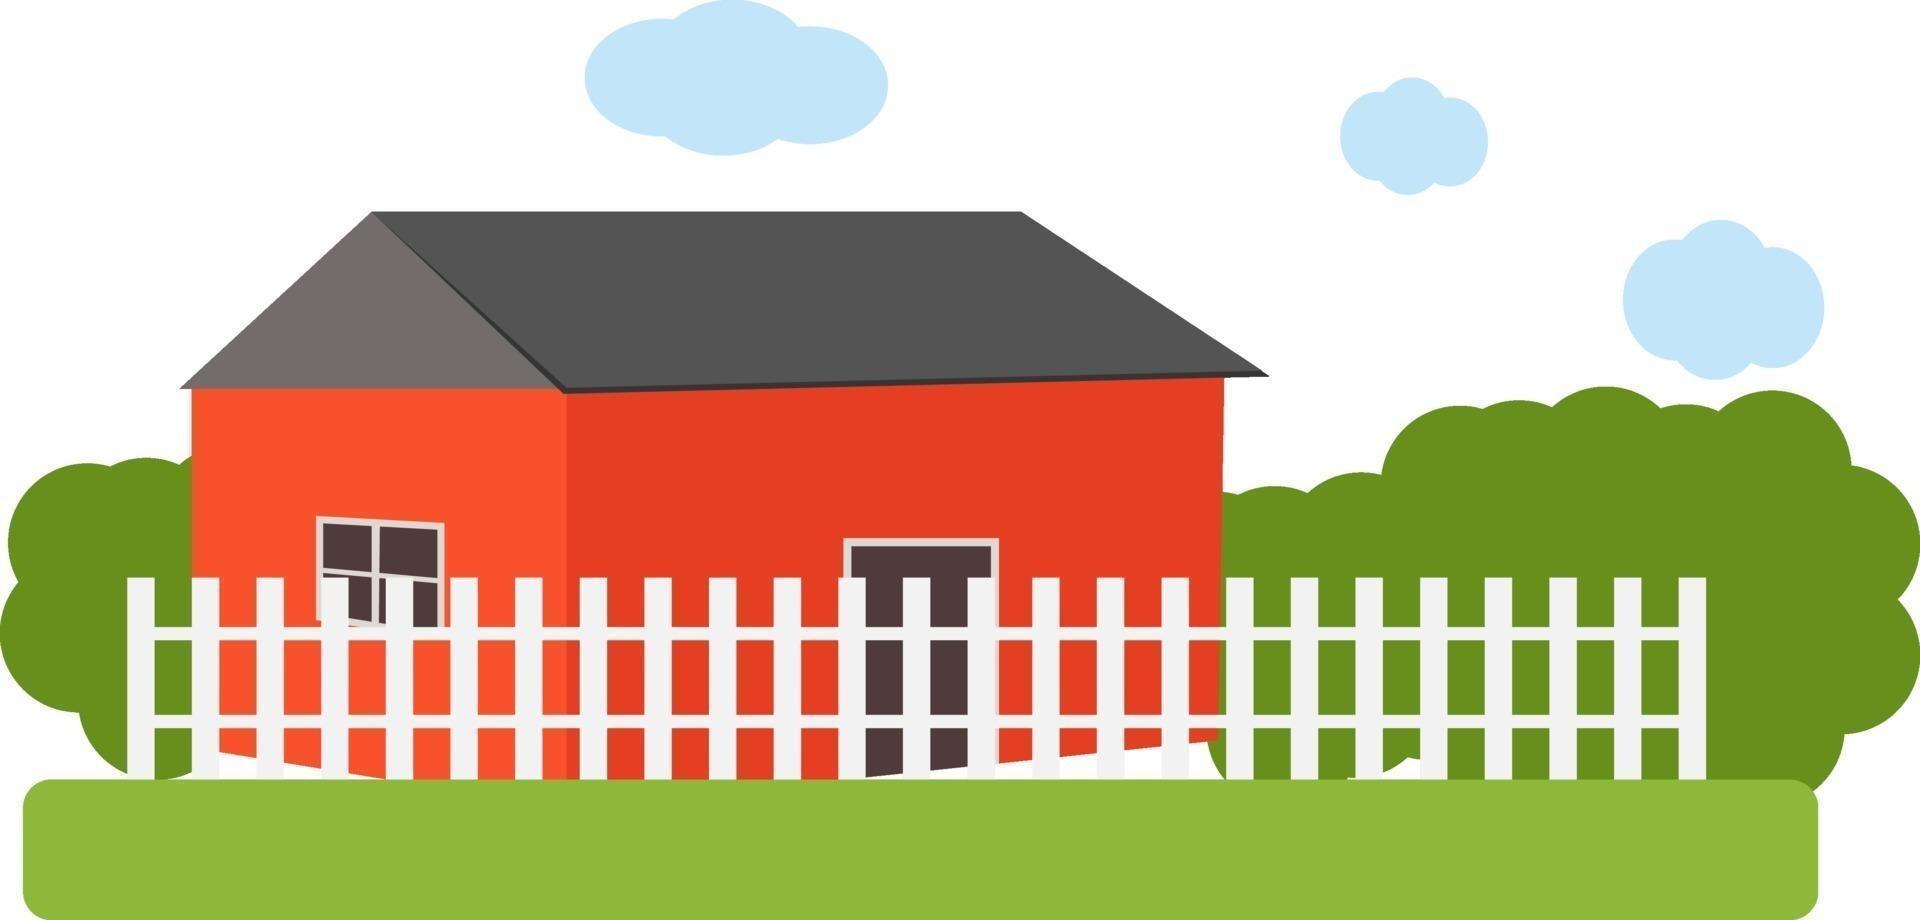 Farm house, illustration, vector on a white background.